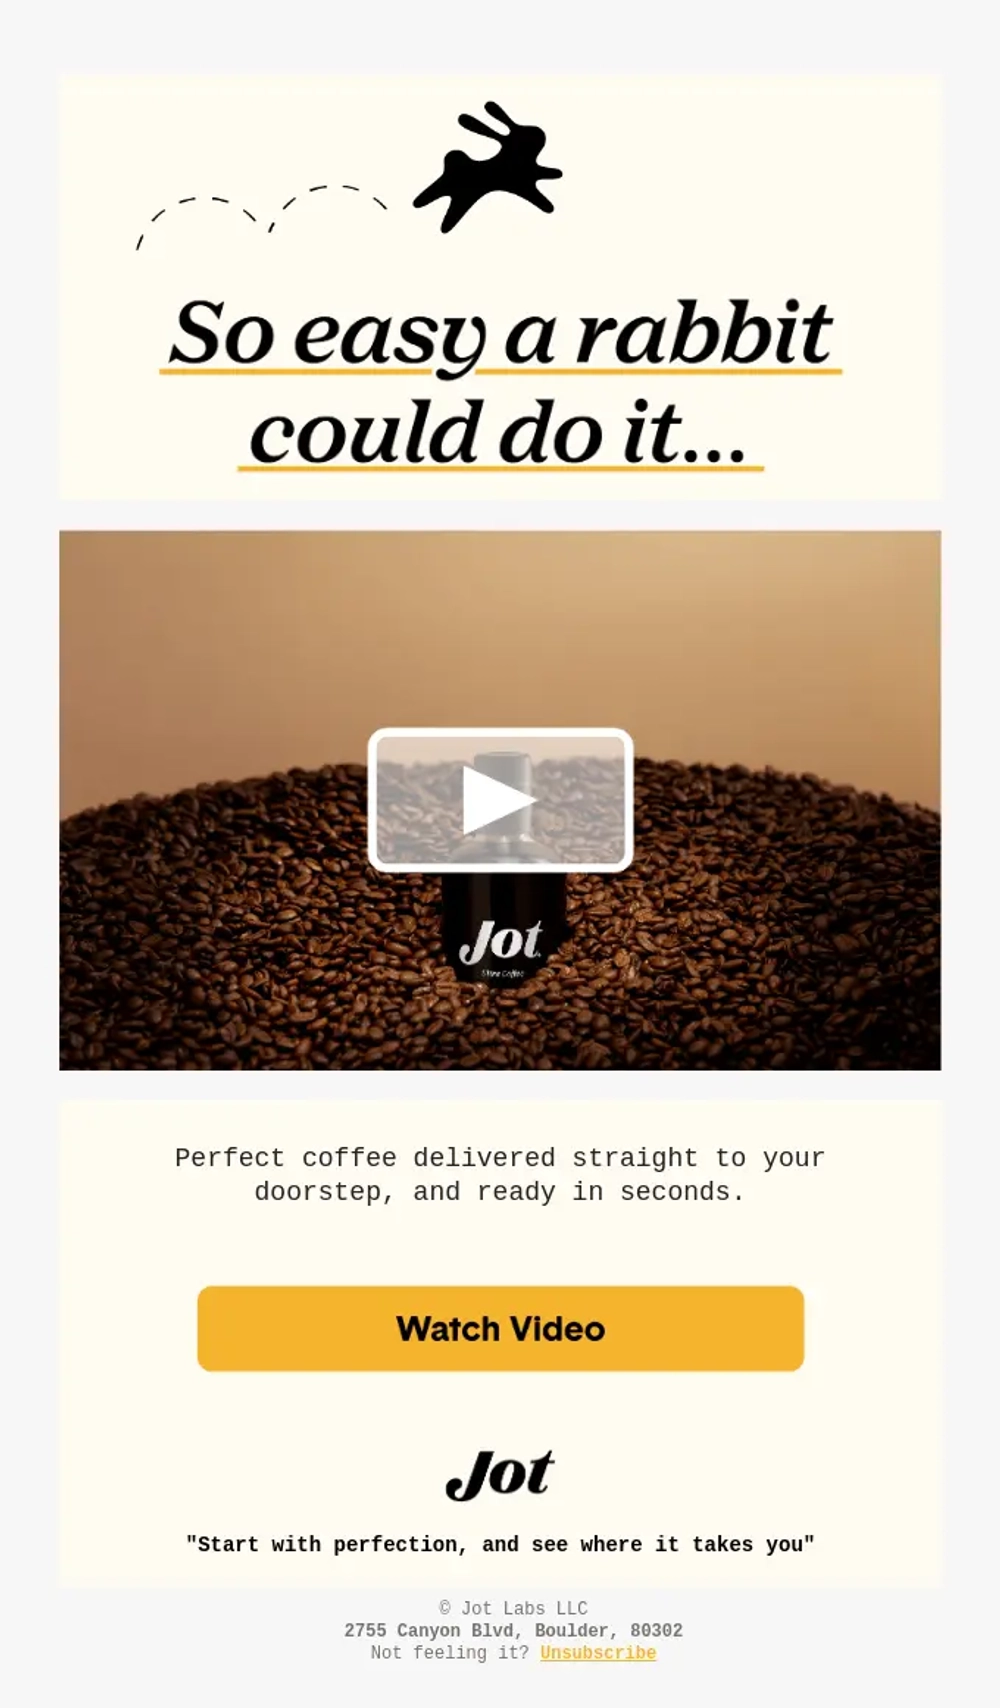 Video email marketing examples